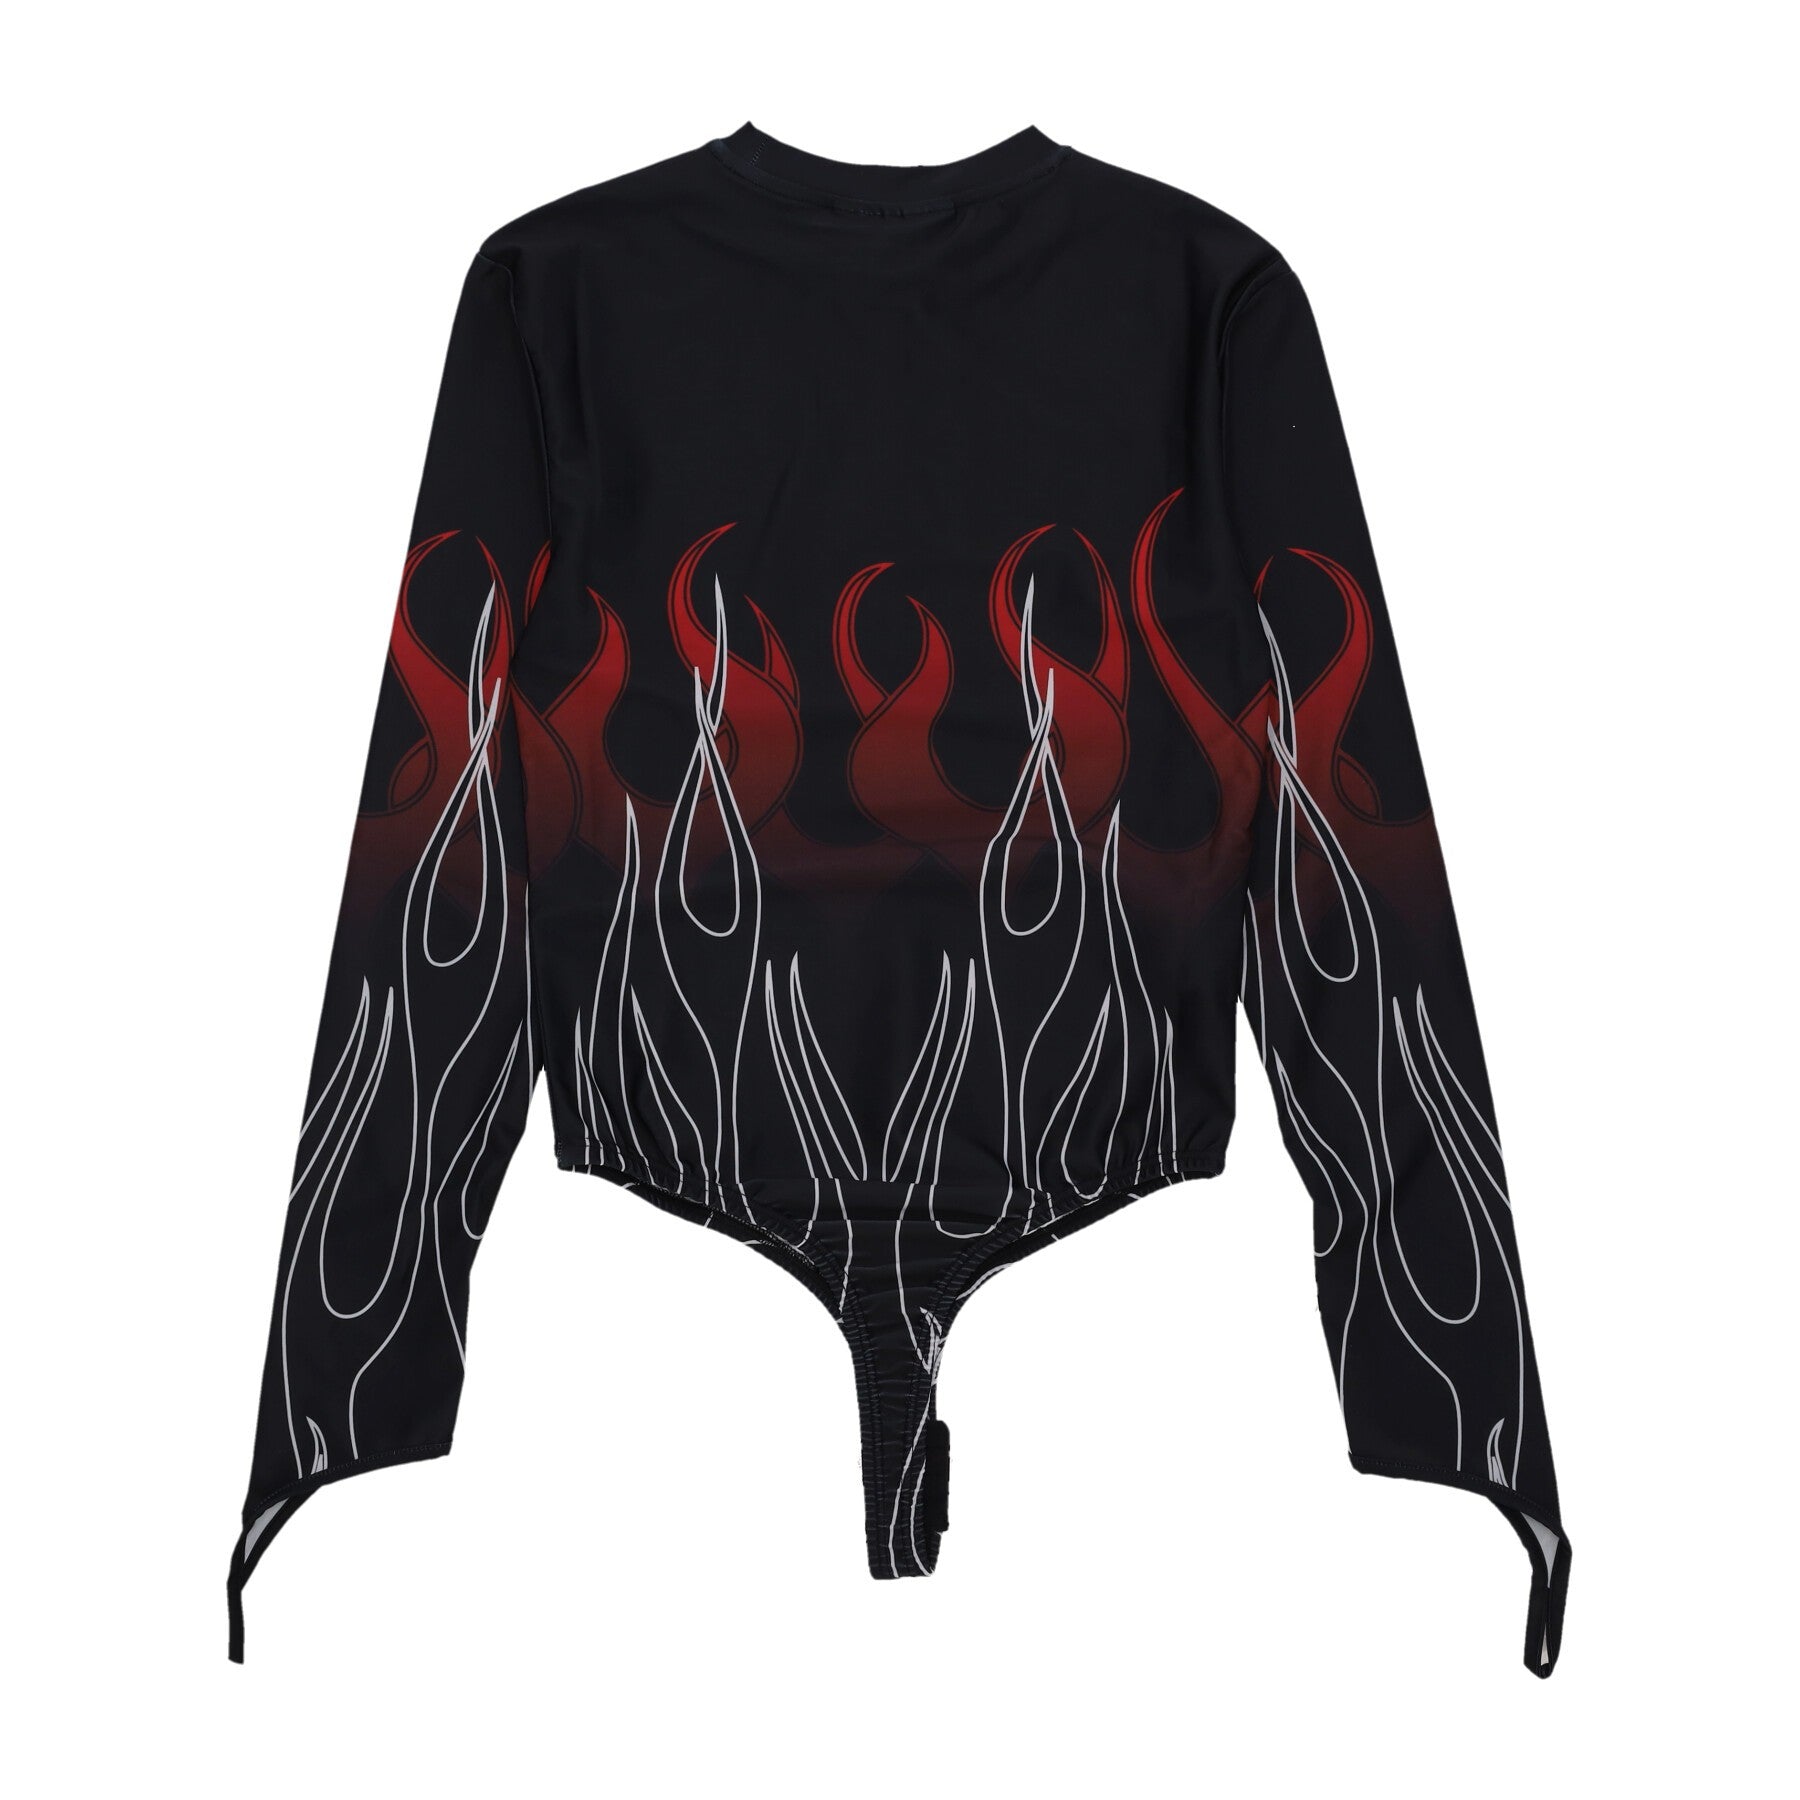 Body Woman Double Flames Body Black/red